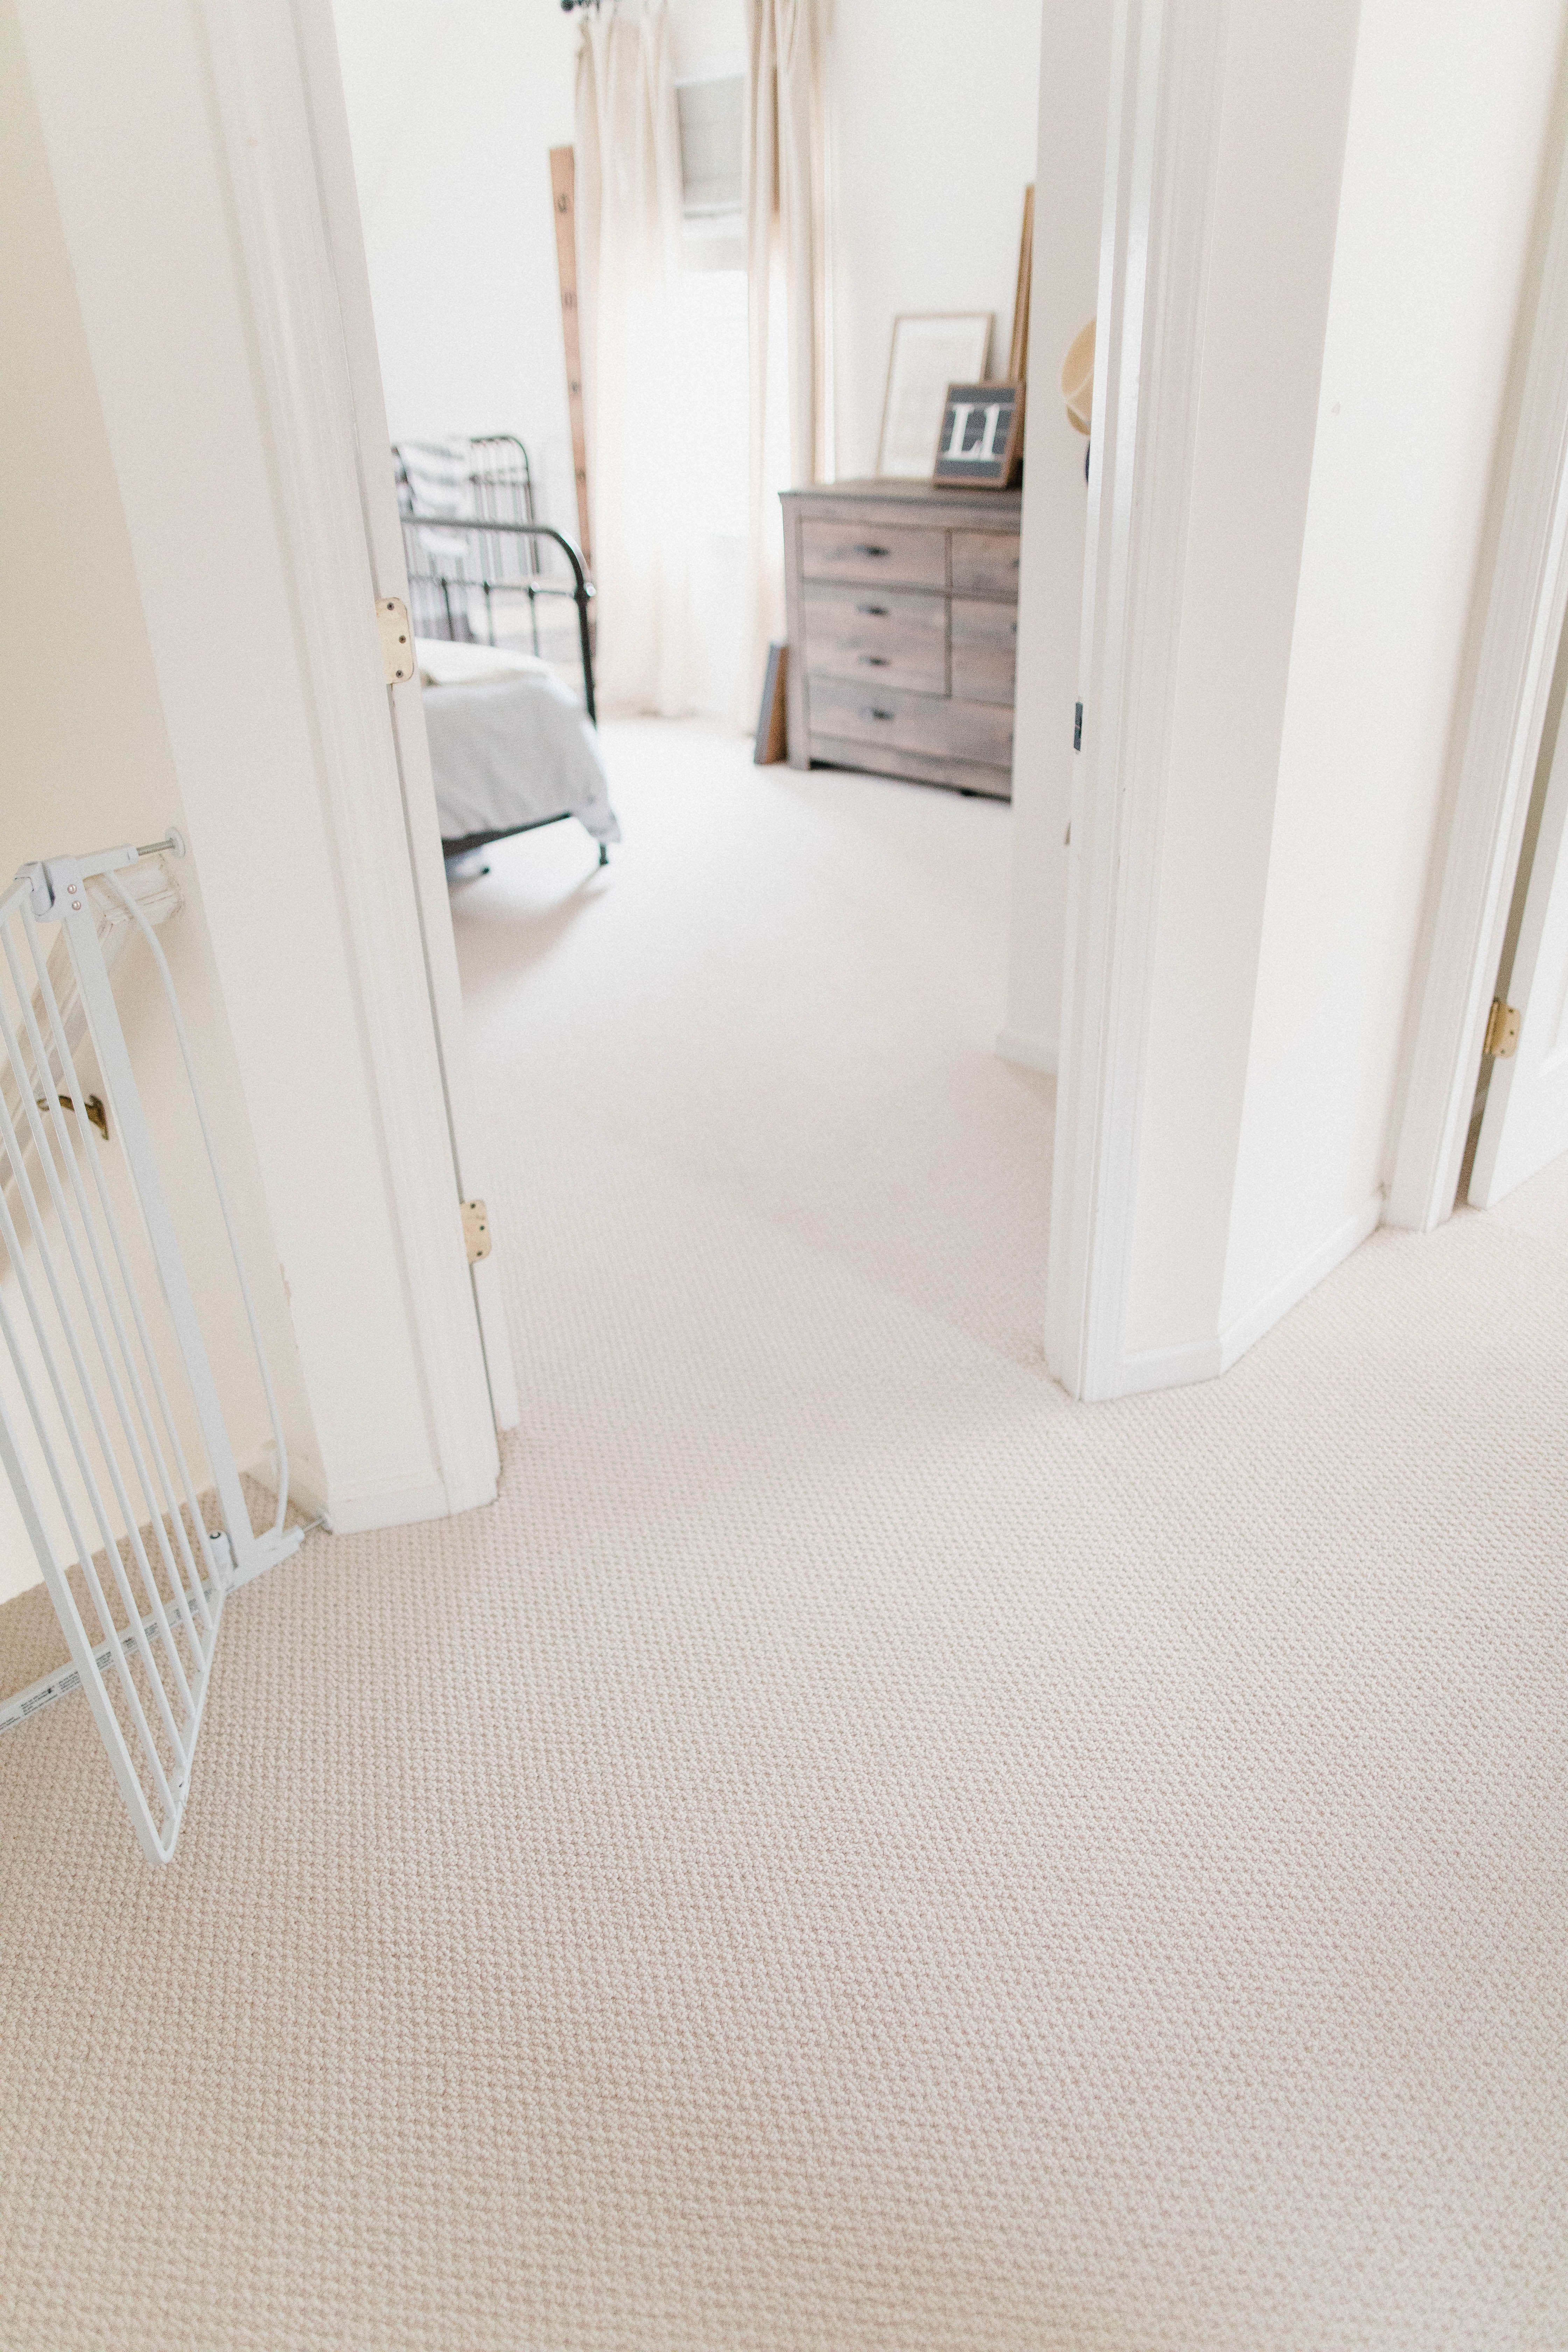 Connecticut life and style blogger Lauren McBride shares why she installed wall to wall carpeting in the upstairs of her home, including facts on the benefits of carpeting.